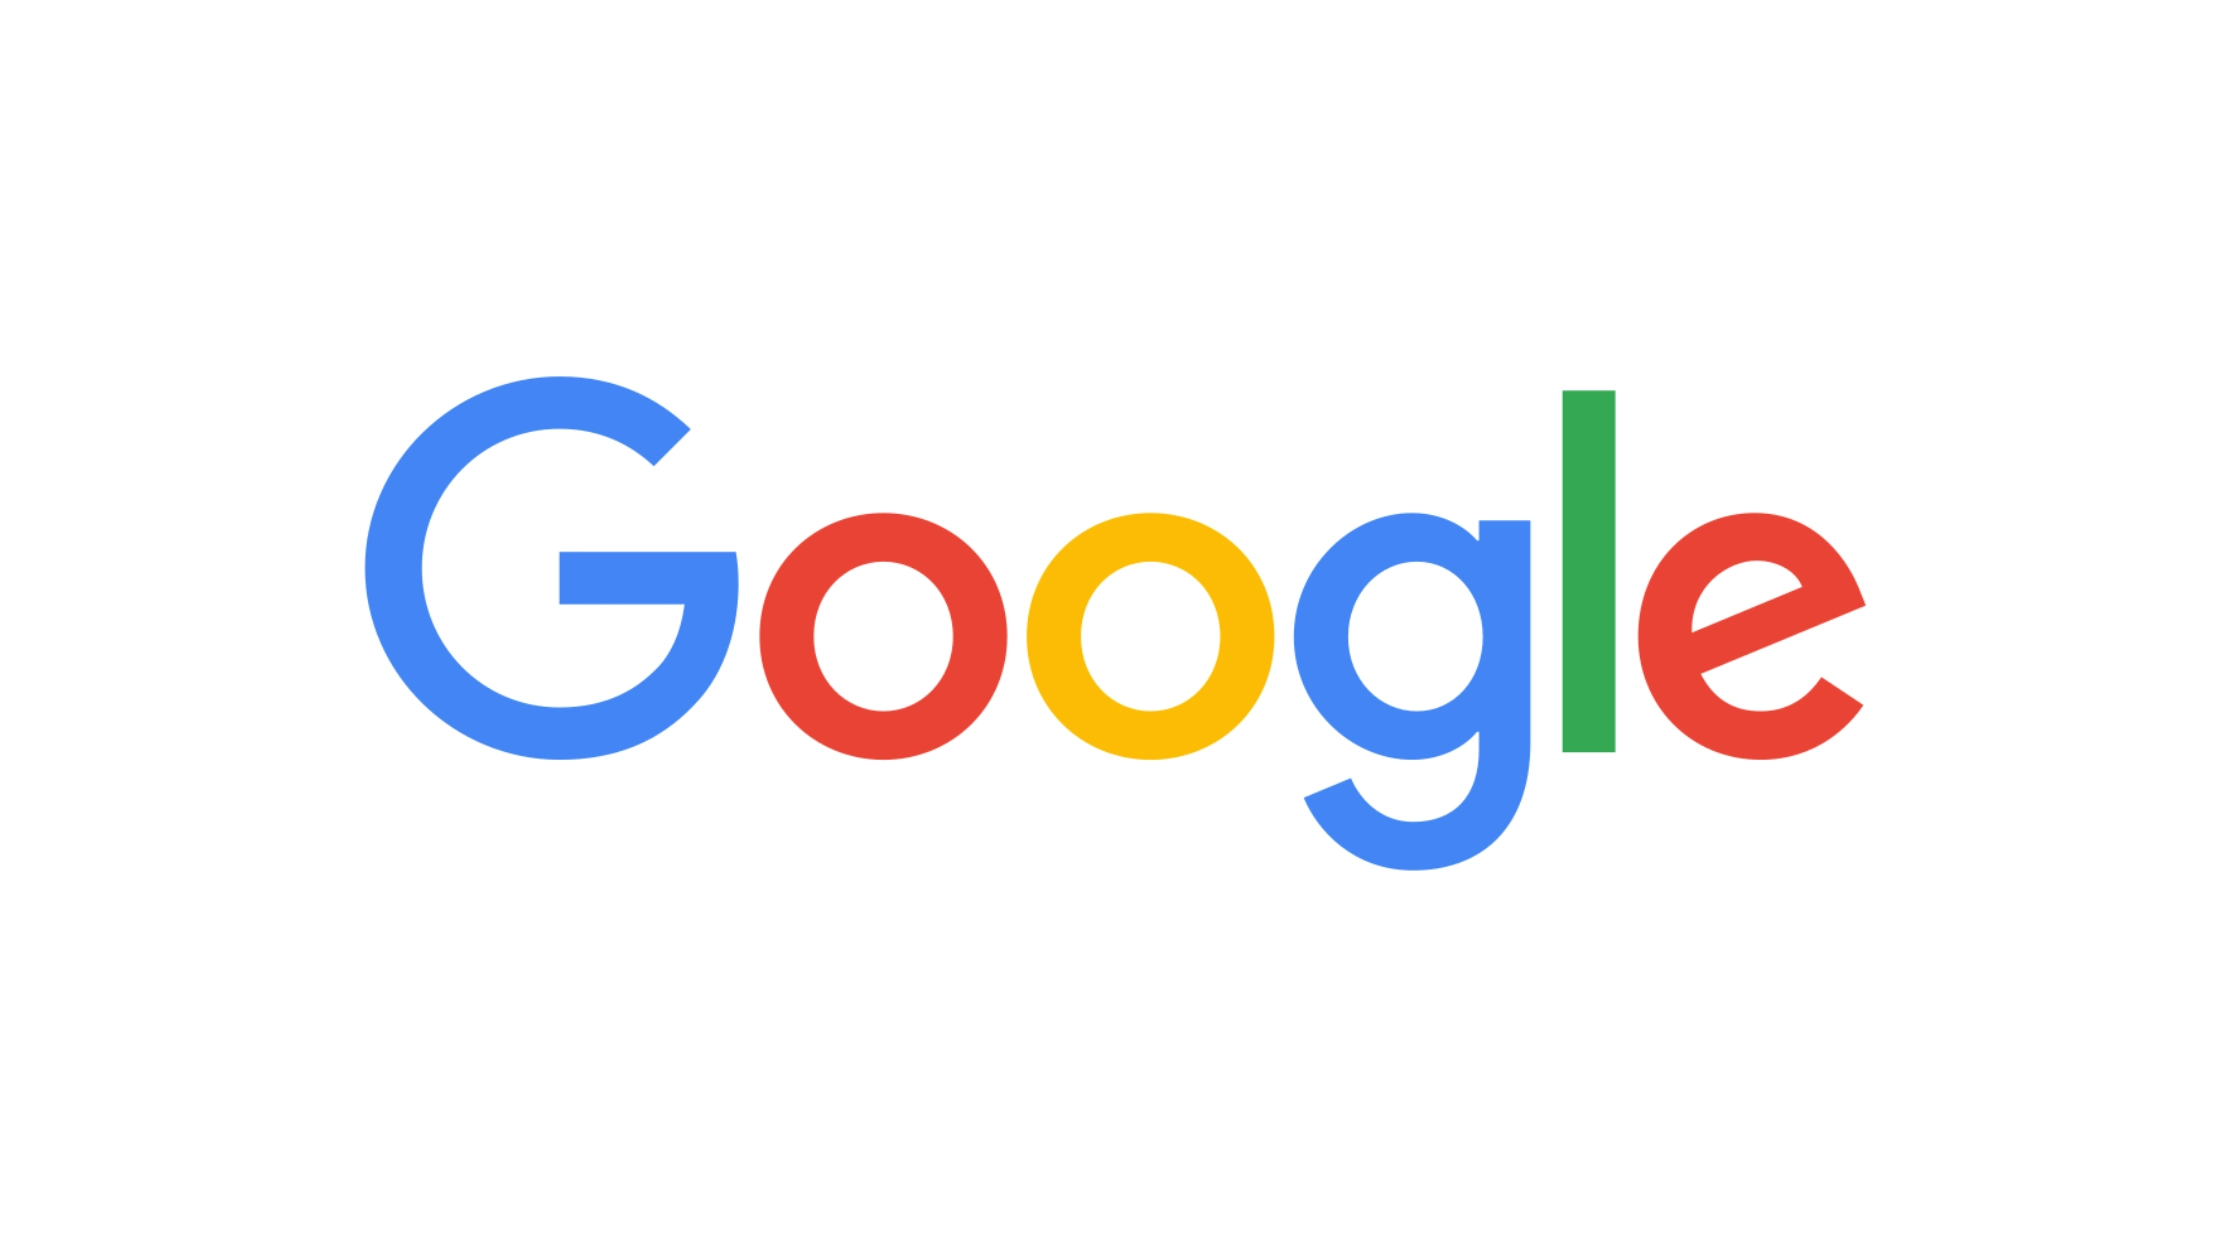 What Font Does Google Use?